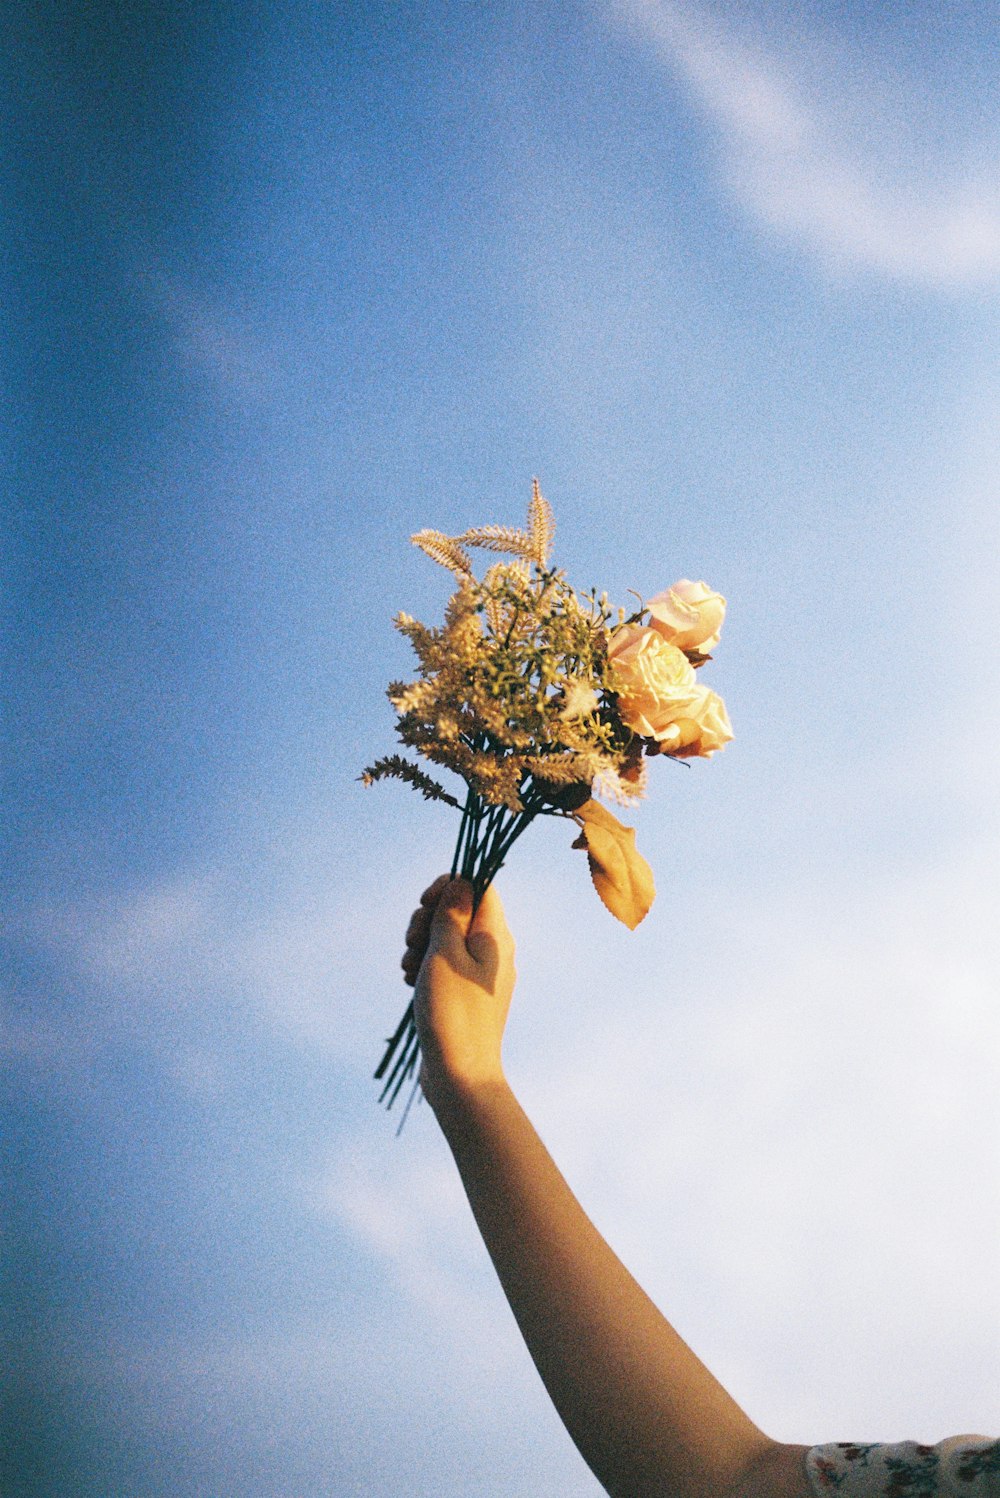 person holding yellow flower under blue sky during daytime